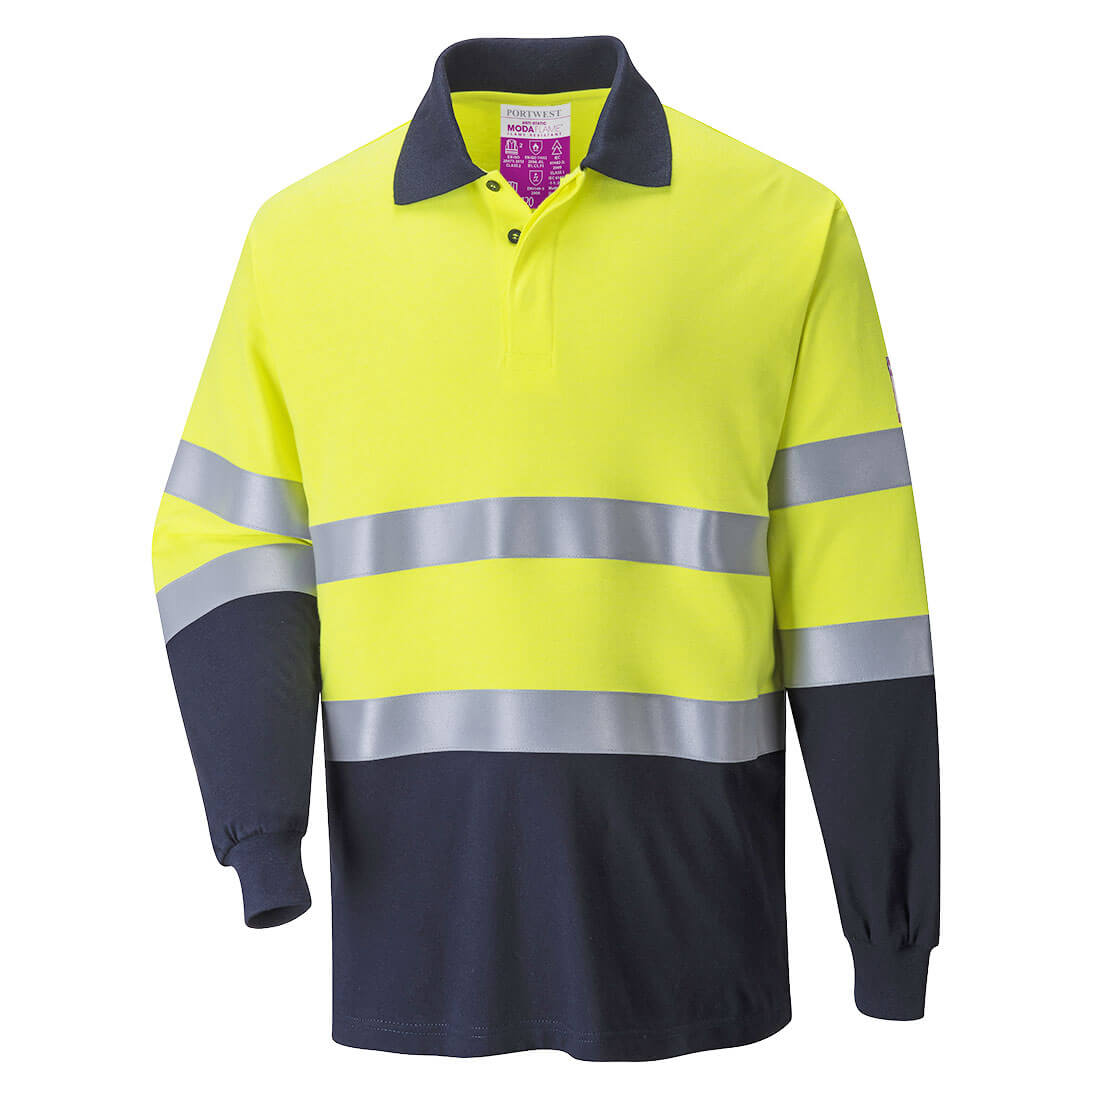 Image of Modaflame Mens Flame Resistant Hi Vis 2-Tone Polo Shirt Yellow / Navy S